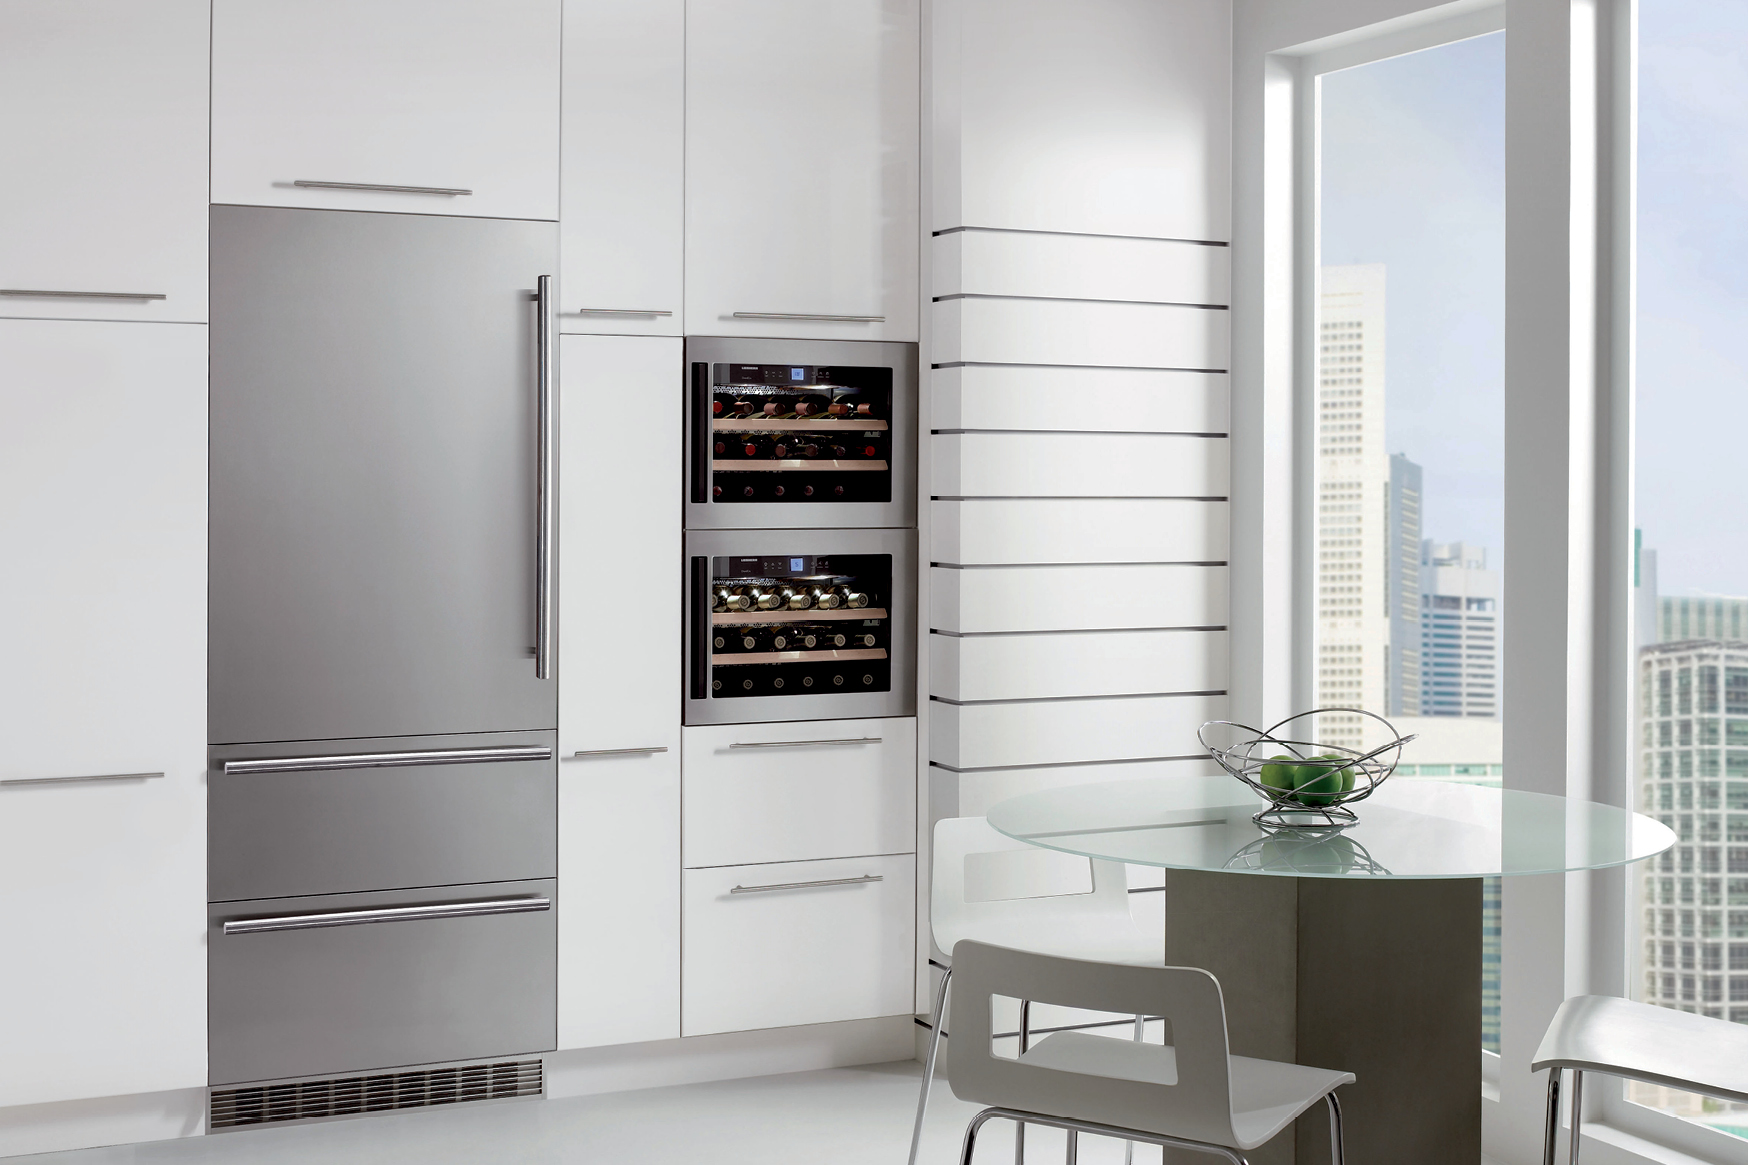 Learn How to Integrate a Built-In Refrigerator with Liebherr Appliances